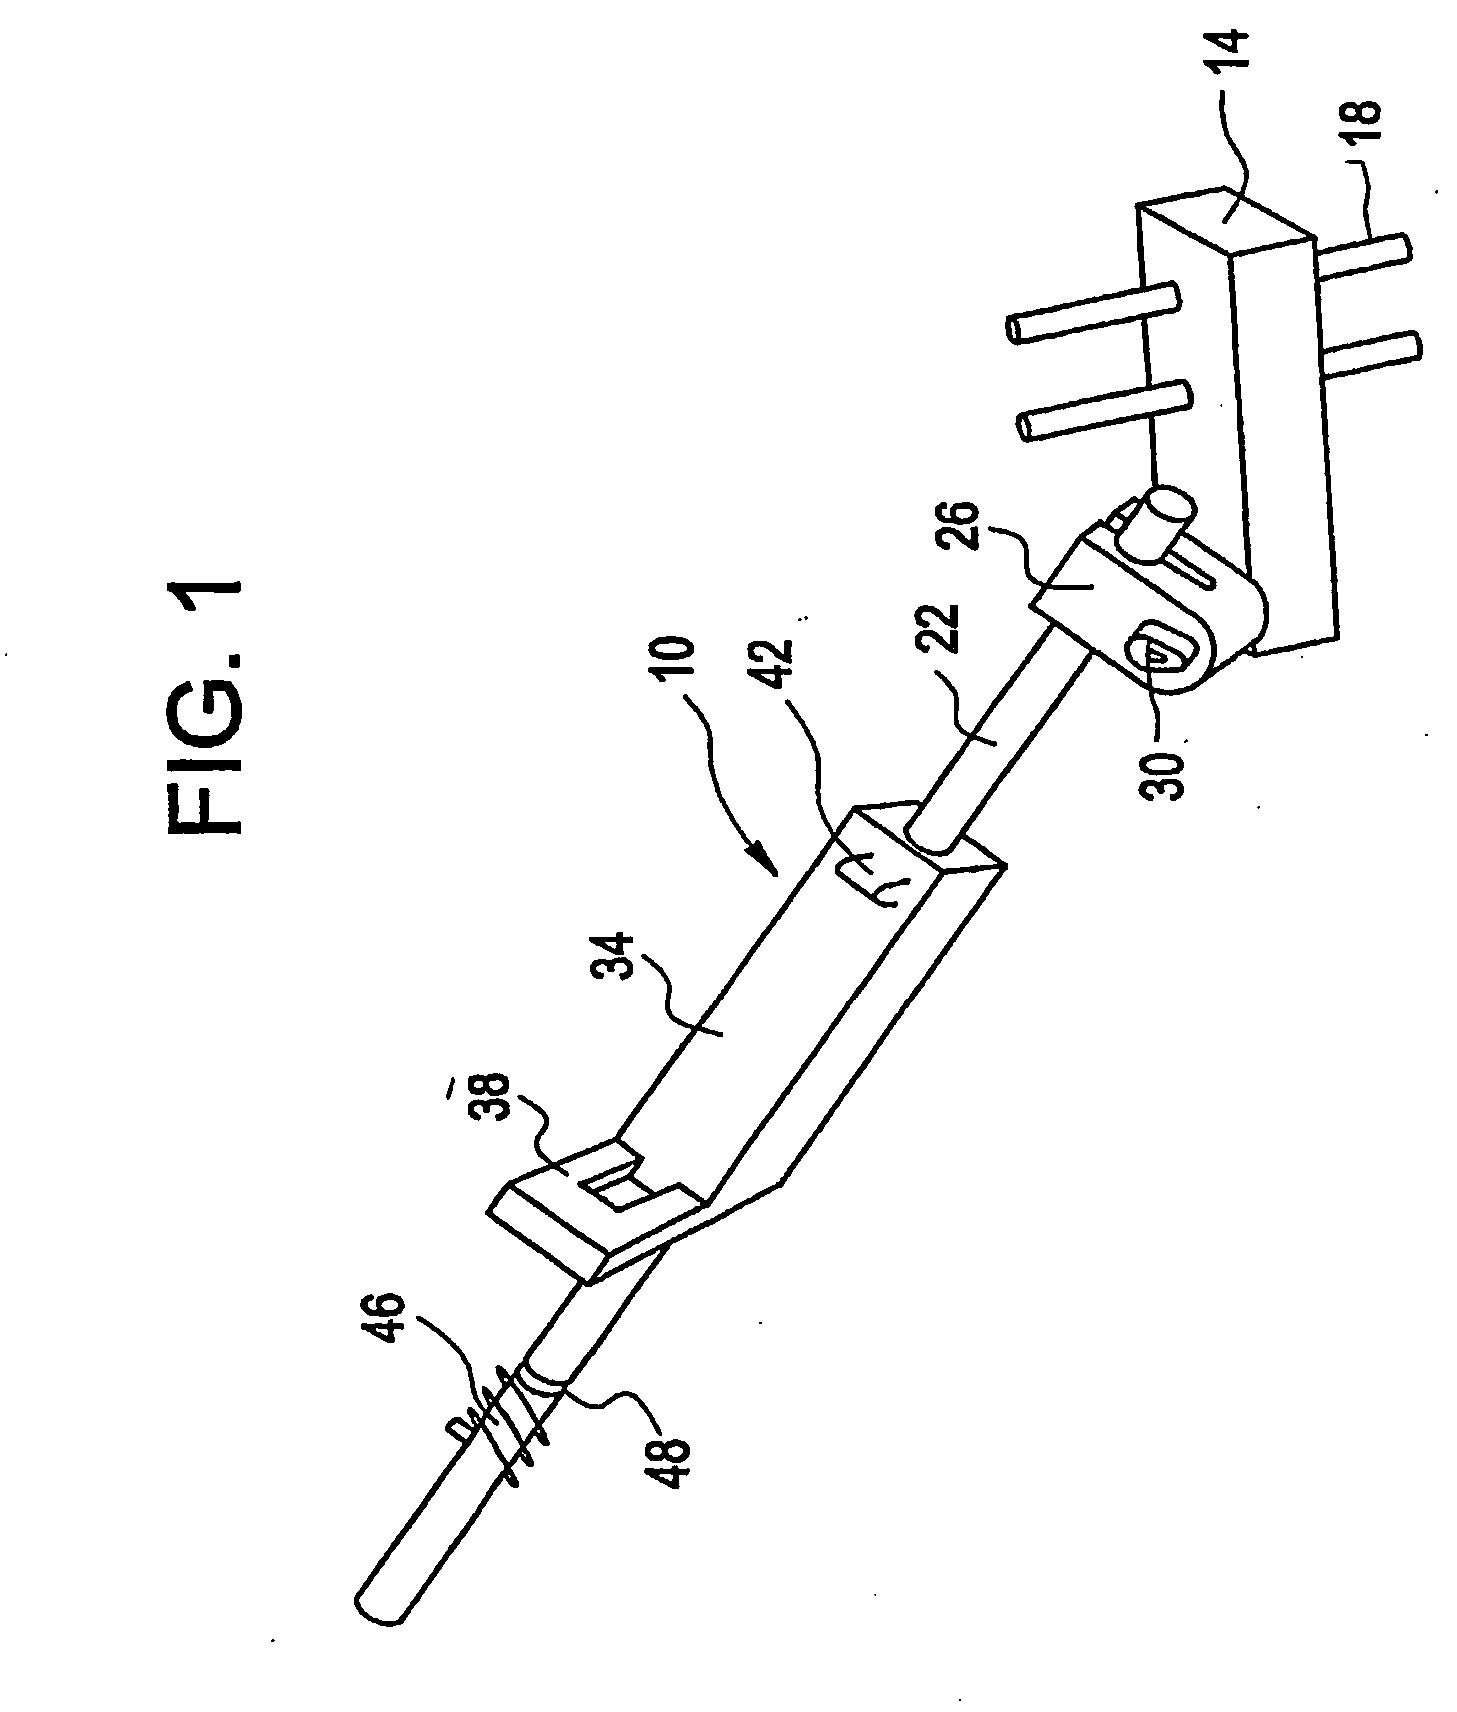 Interchangeable localizing devices for use with tracking systems